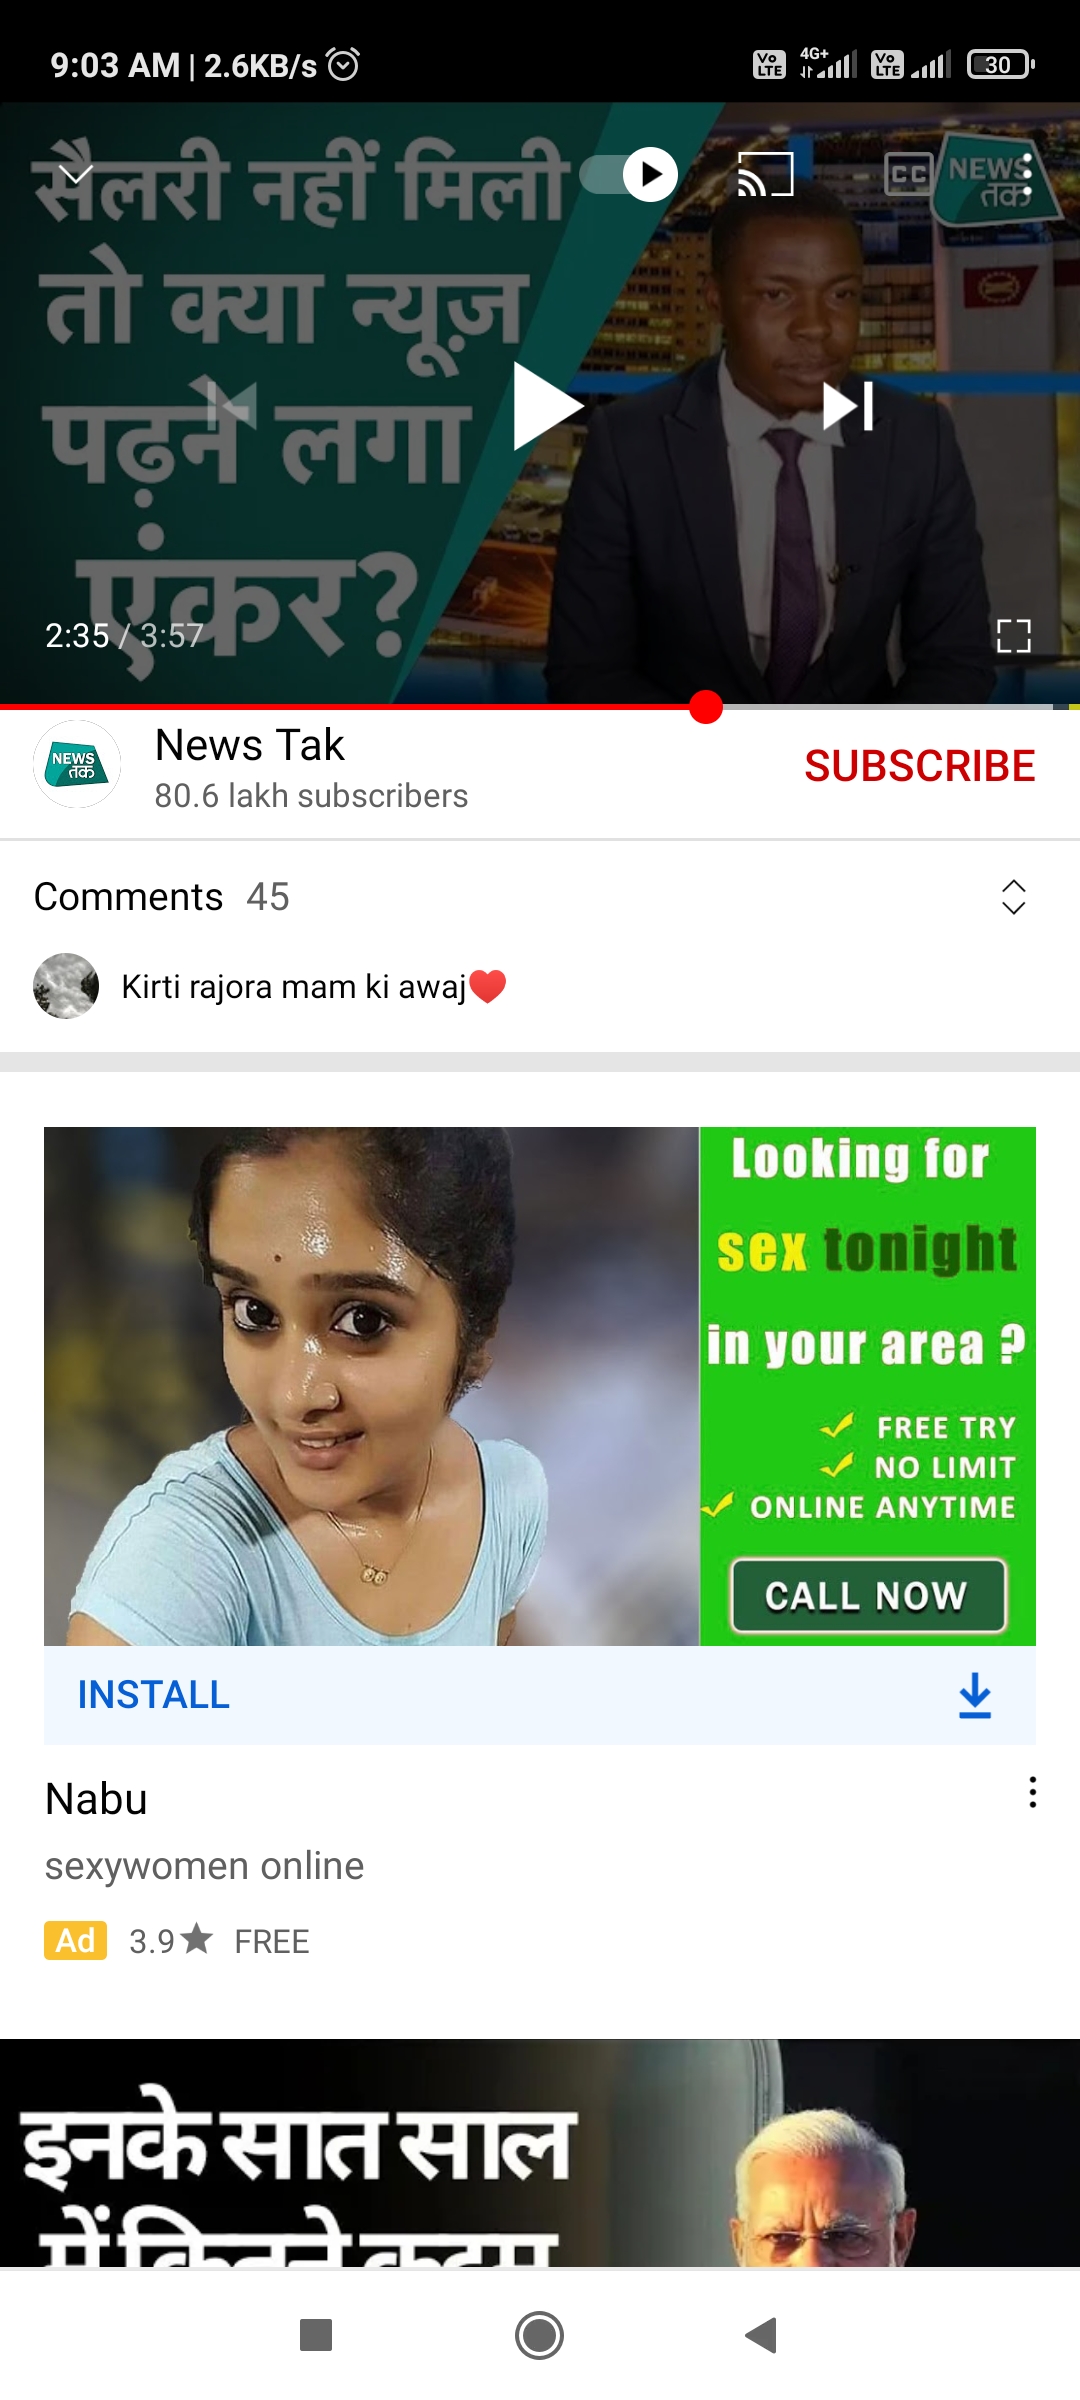 Youtube Xvideo Sexual - In youtube ads is totally sex girls selling video ads , porn graphic , ads  showing totally feka - YouTube Community